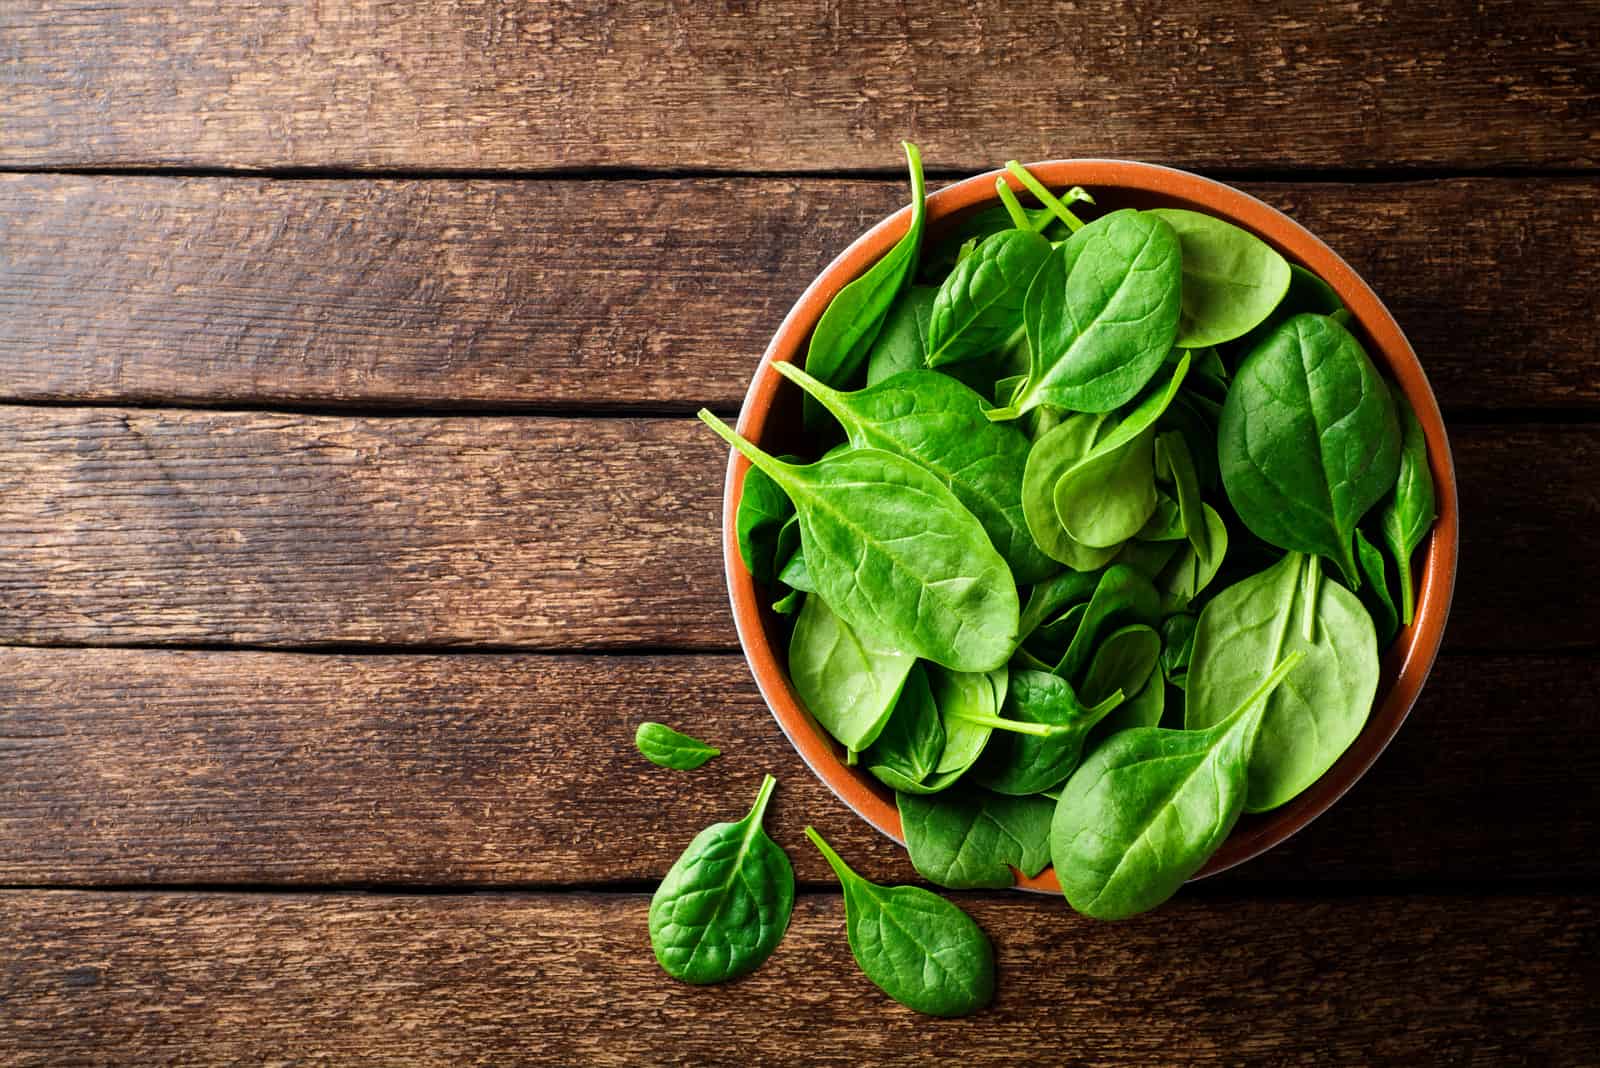 spinach in a wooden bowl